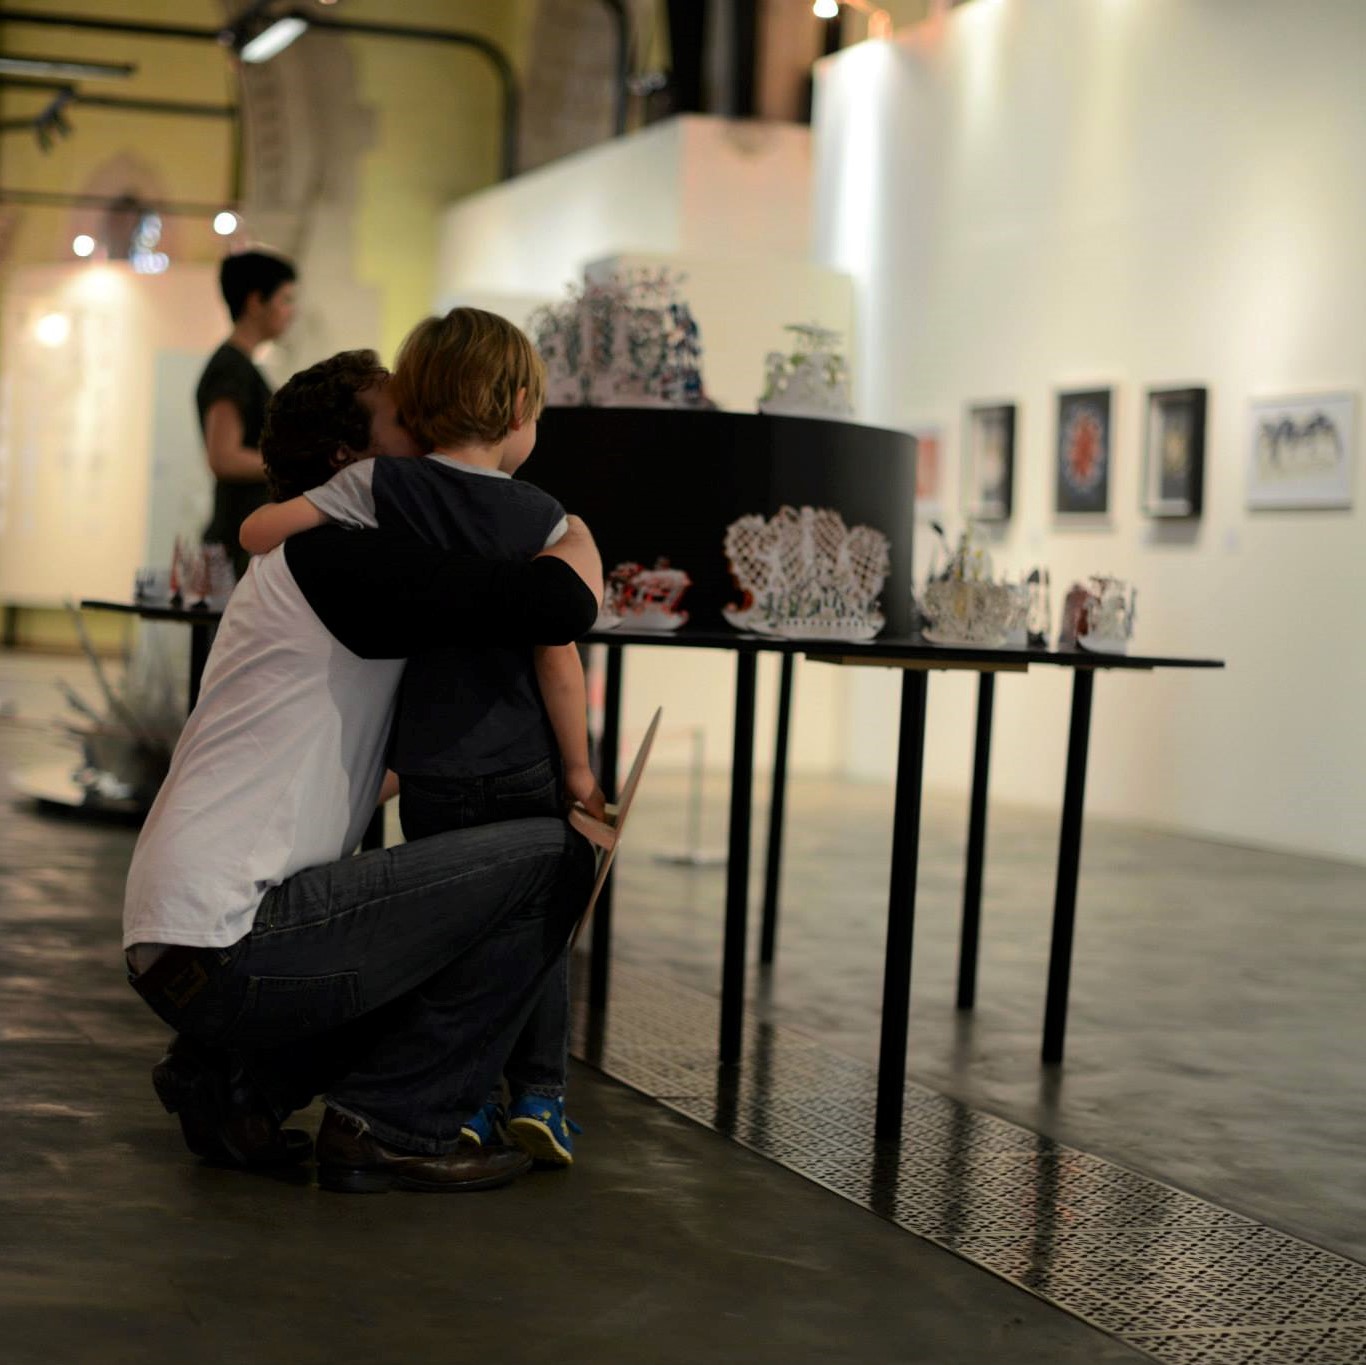 An adult and child with their arms around each other look at exhibits on a table